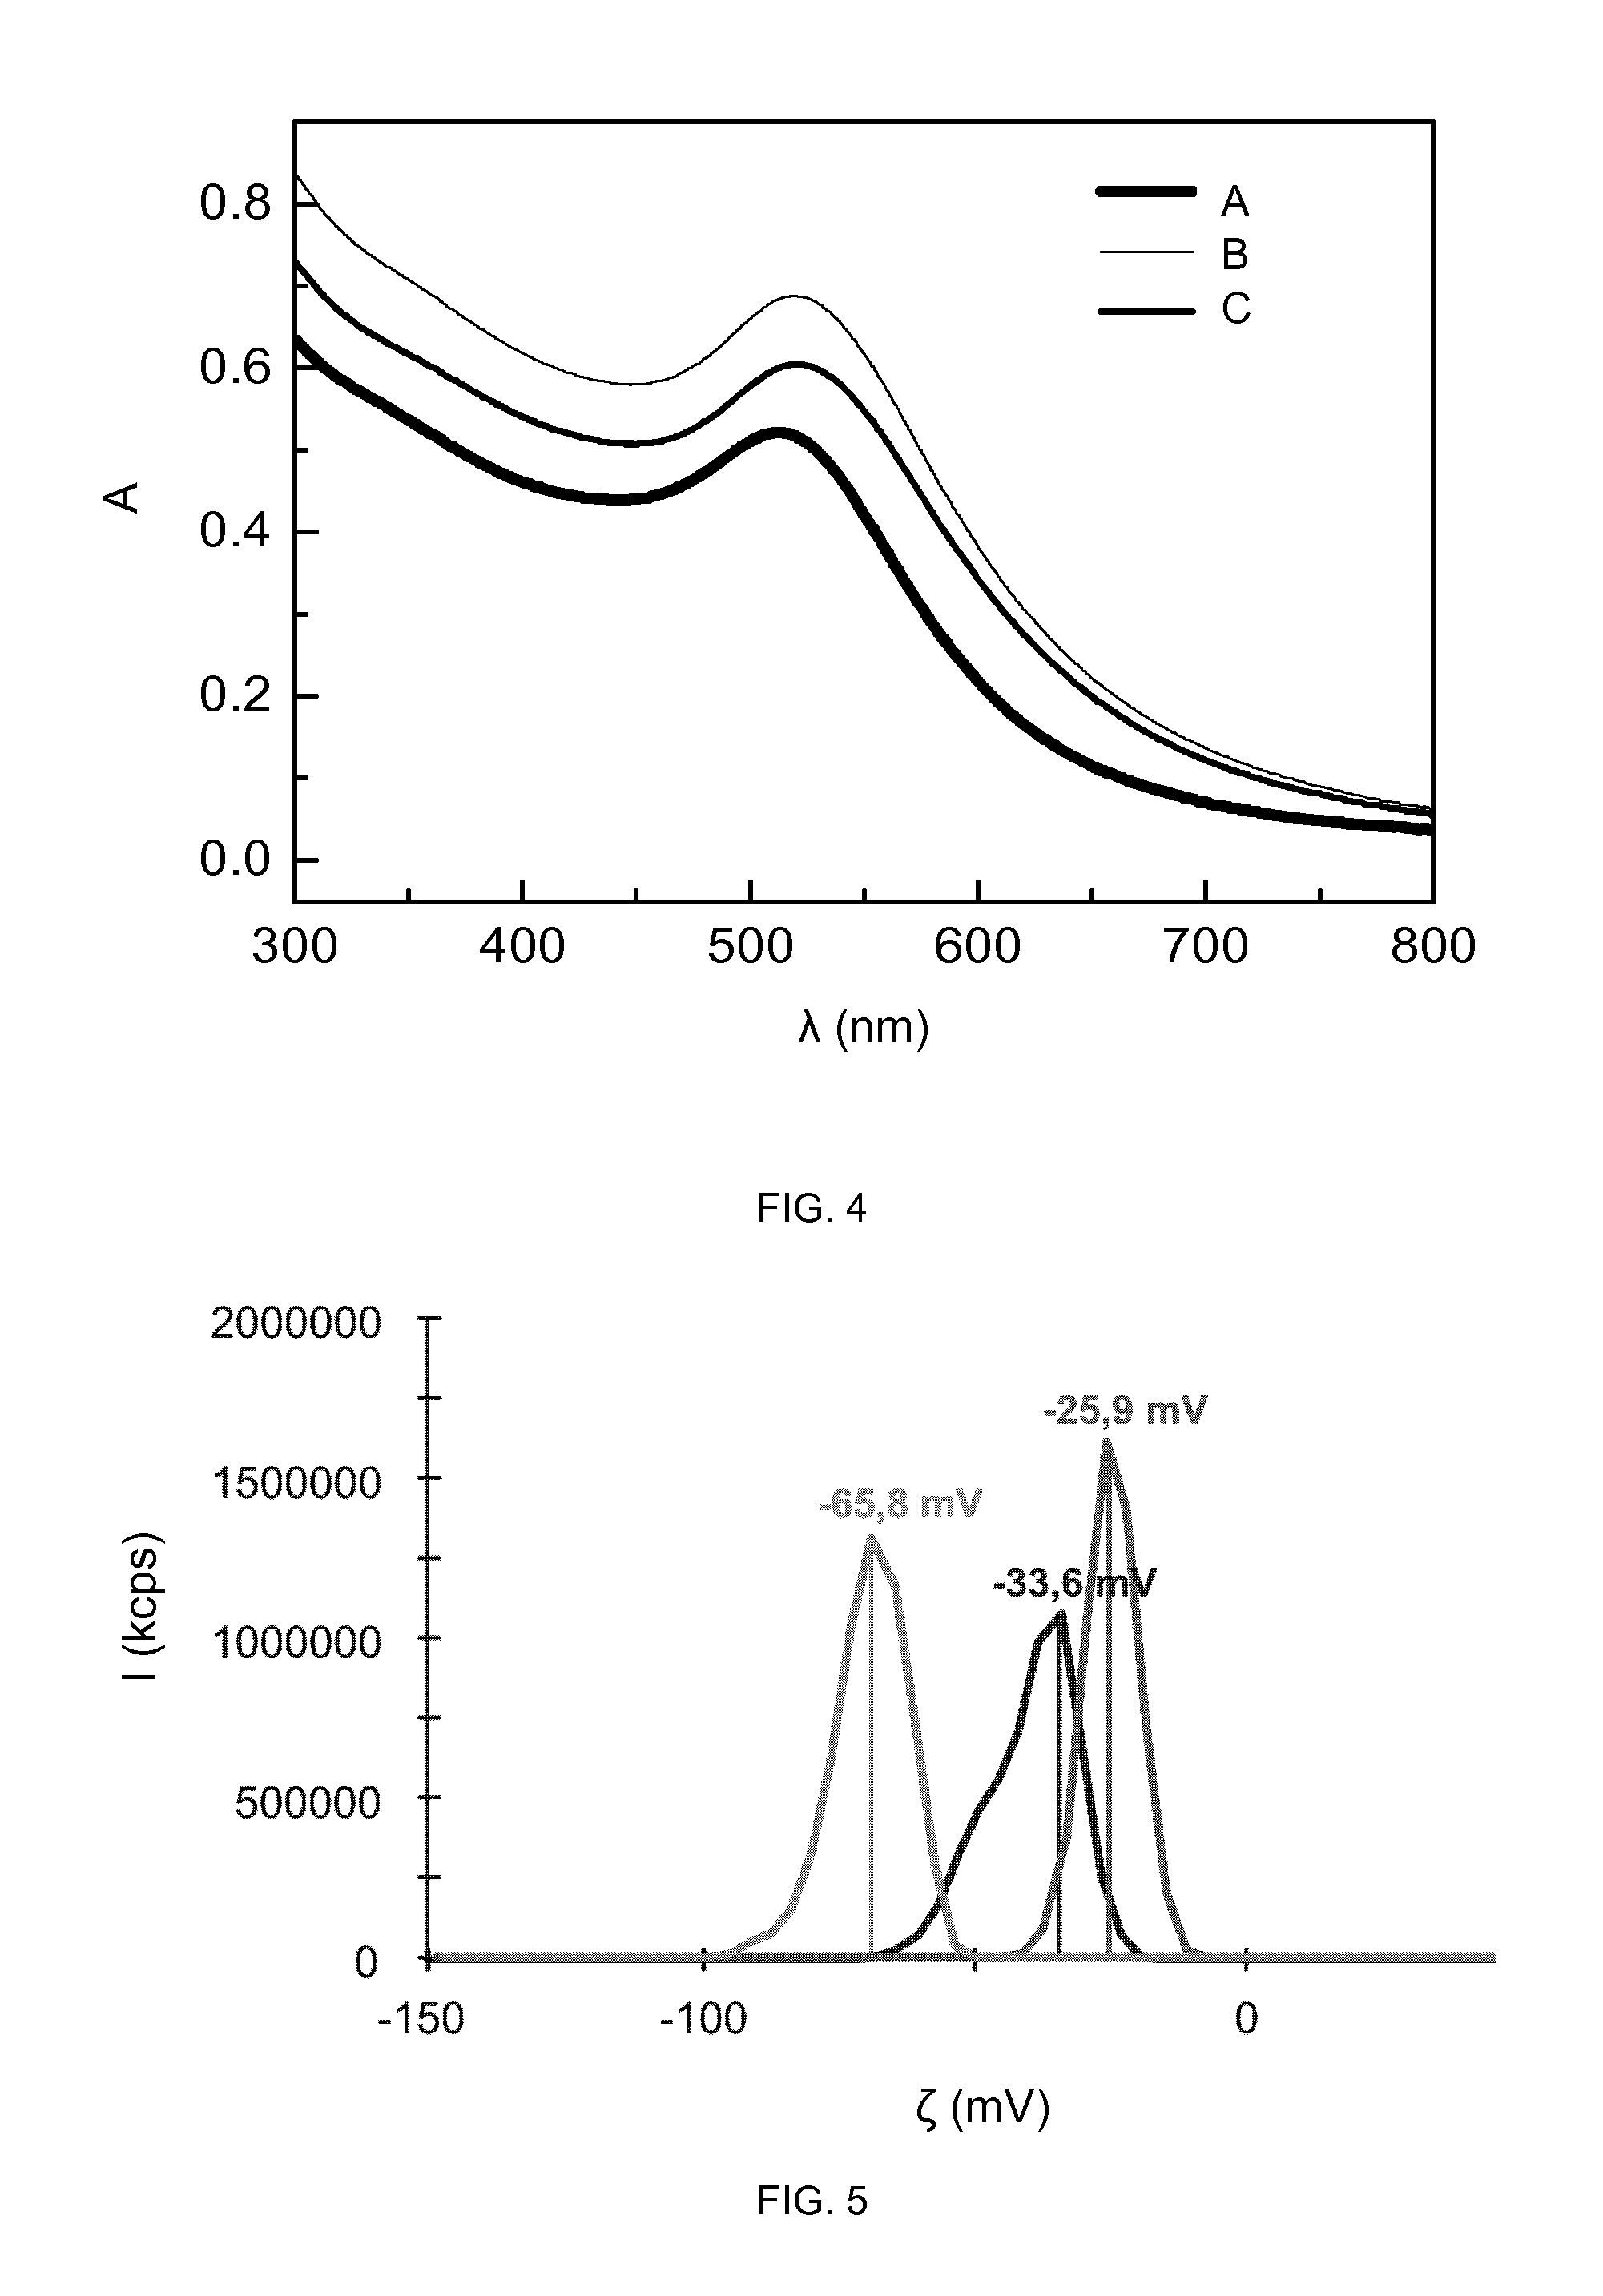 Conjugates comprising nanoparticles coated with platinum containing compounds